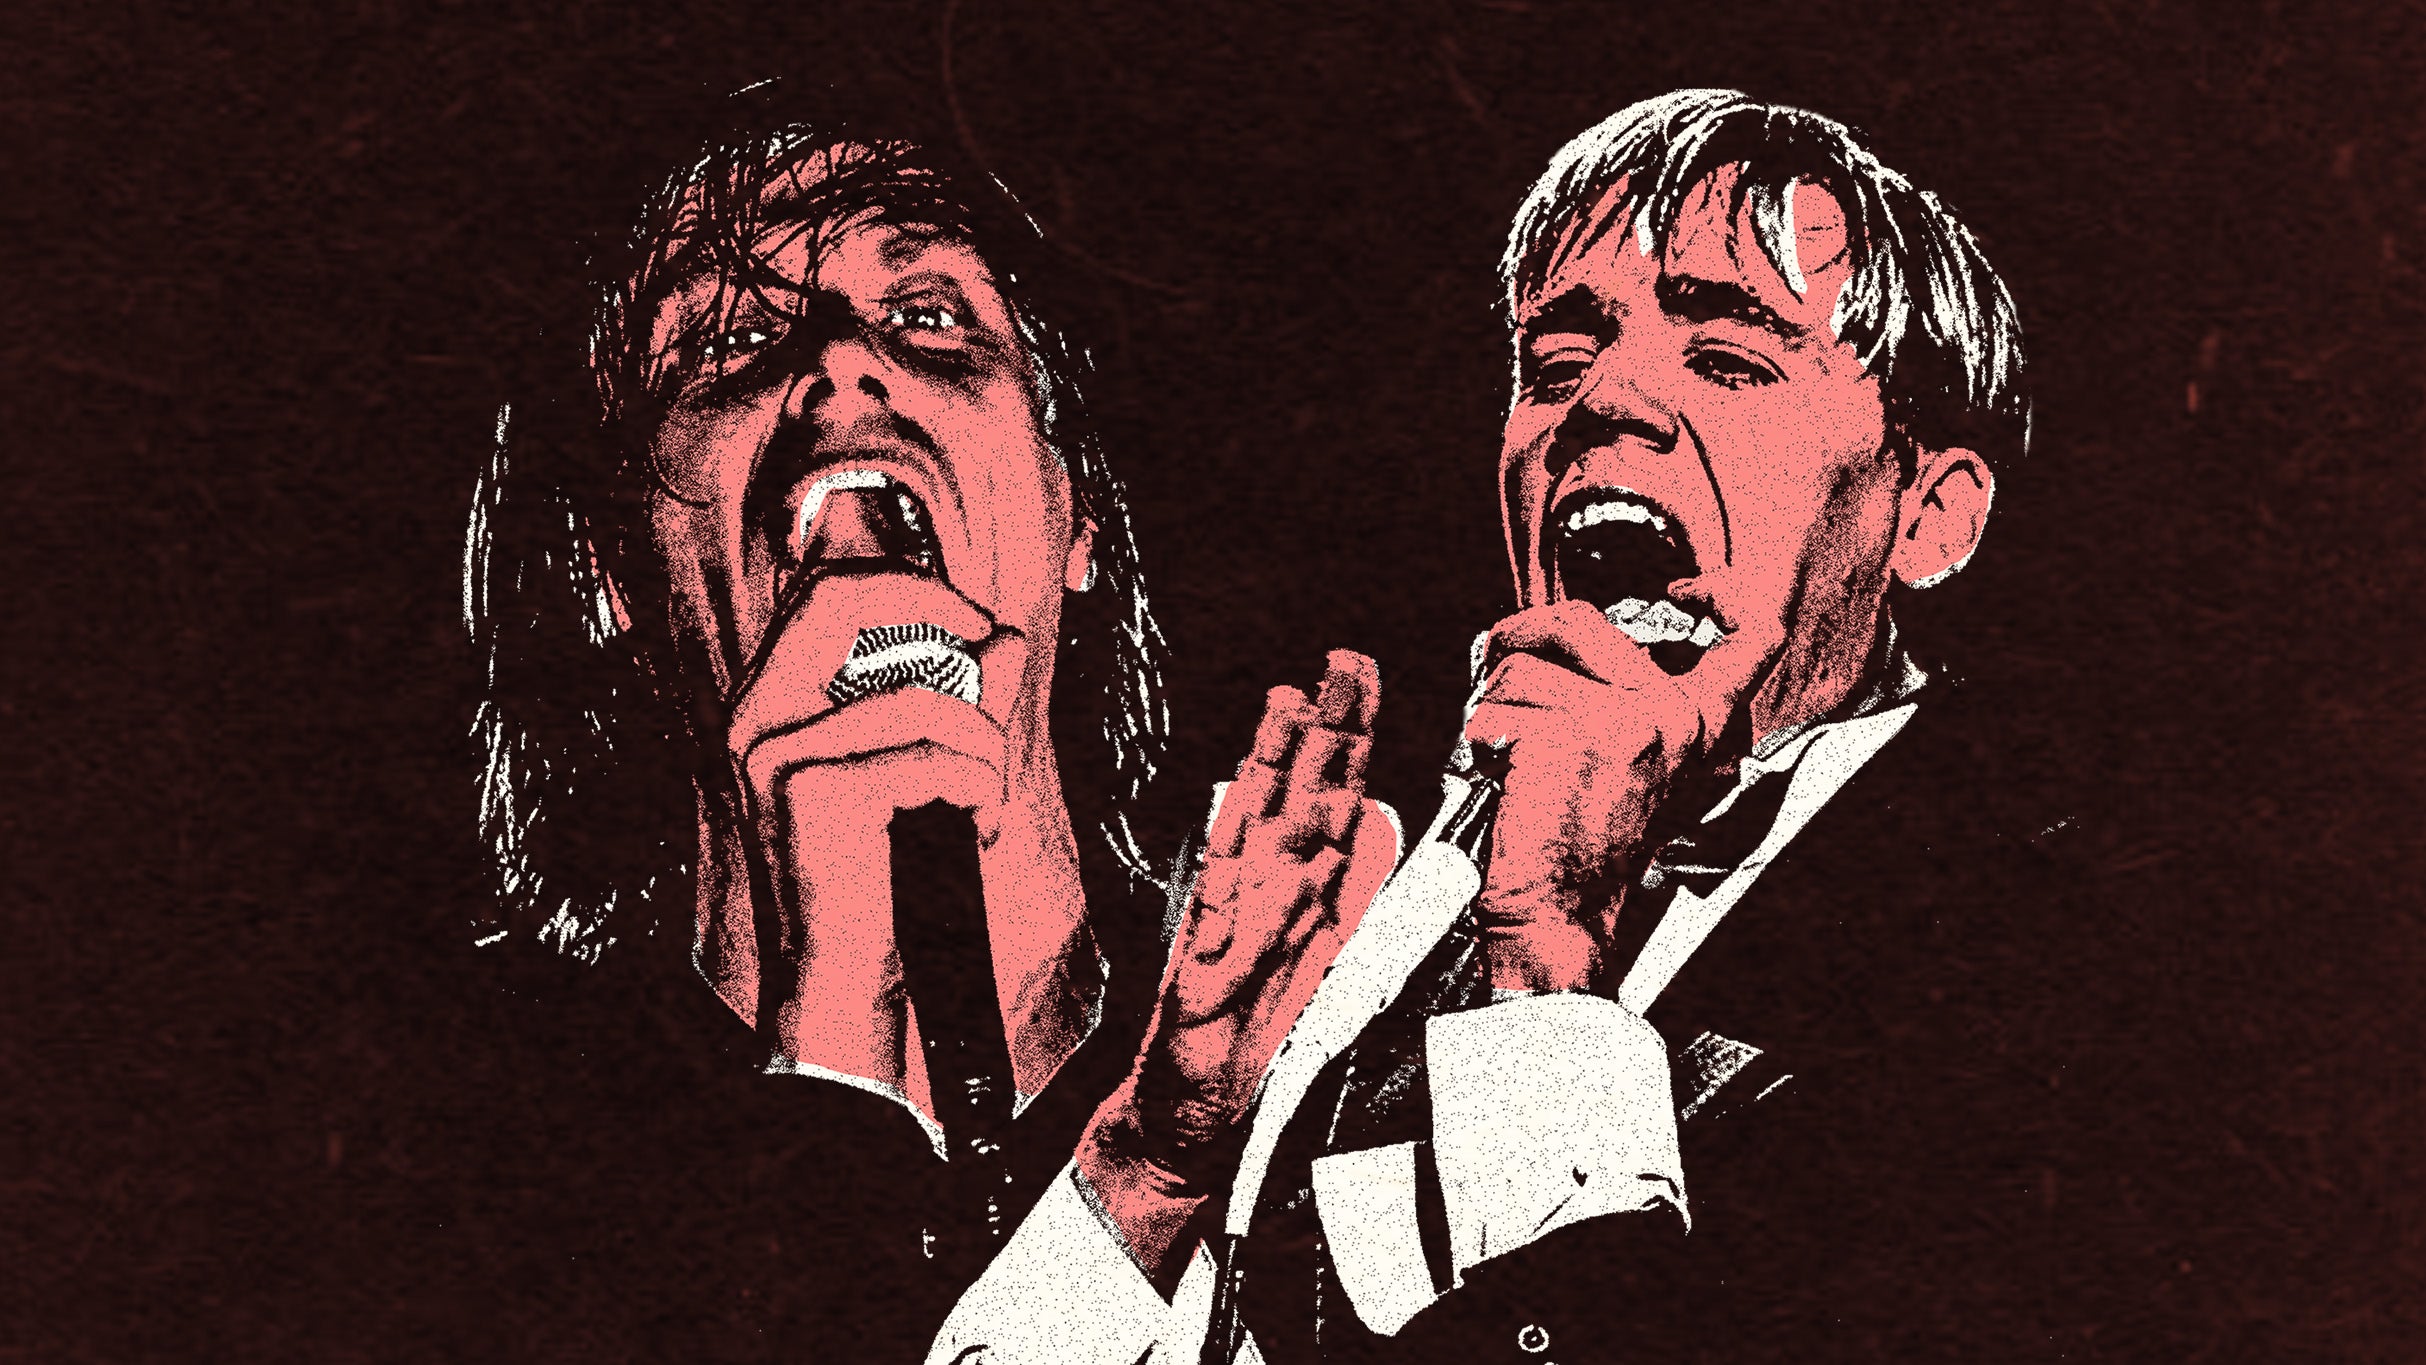 The Hives free presale code for early tickets in Washington